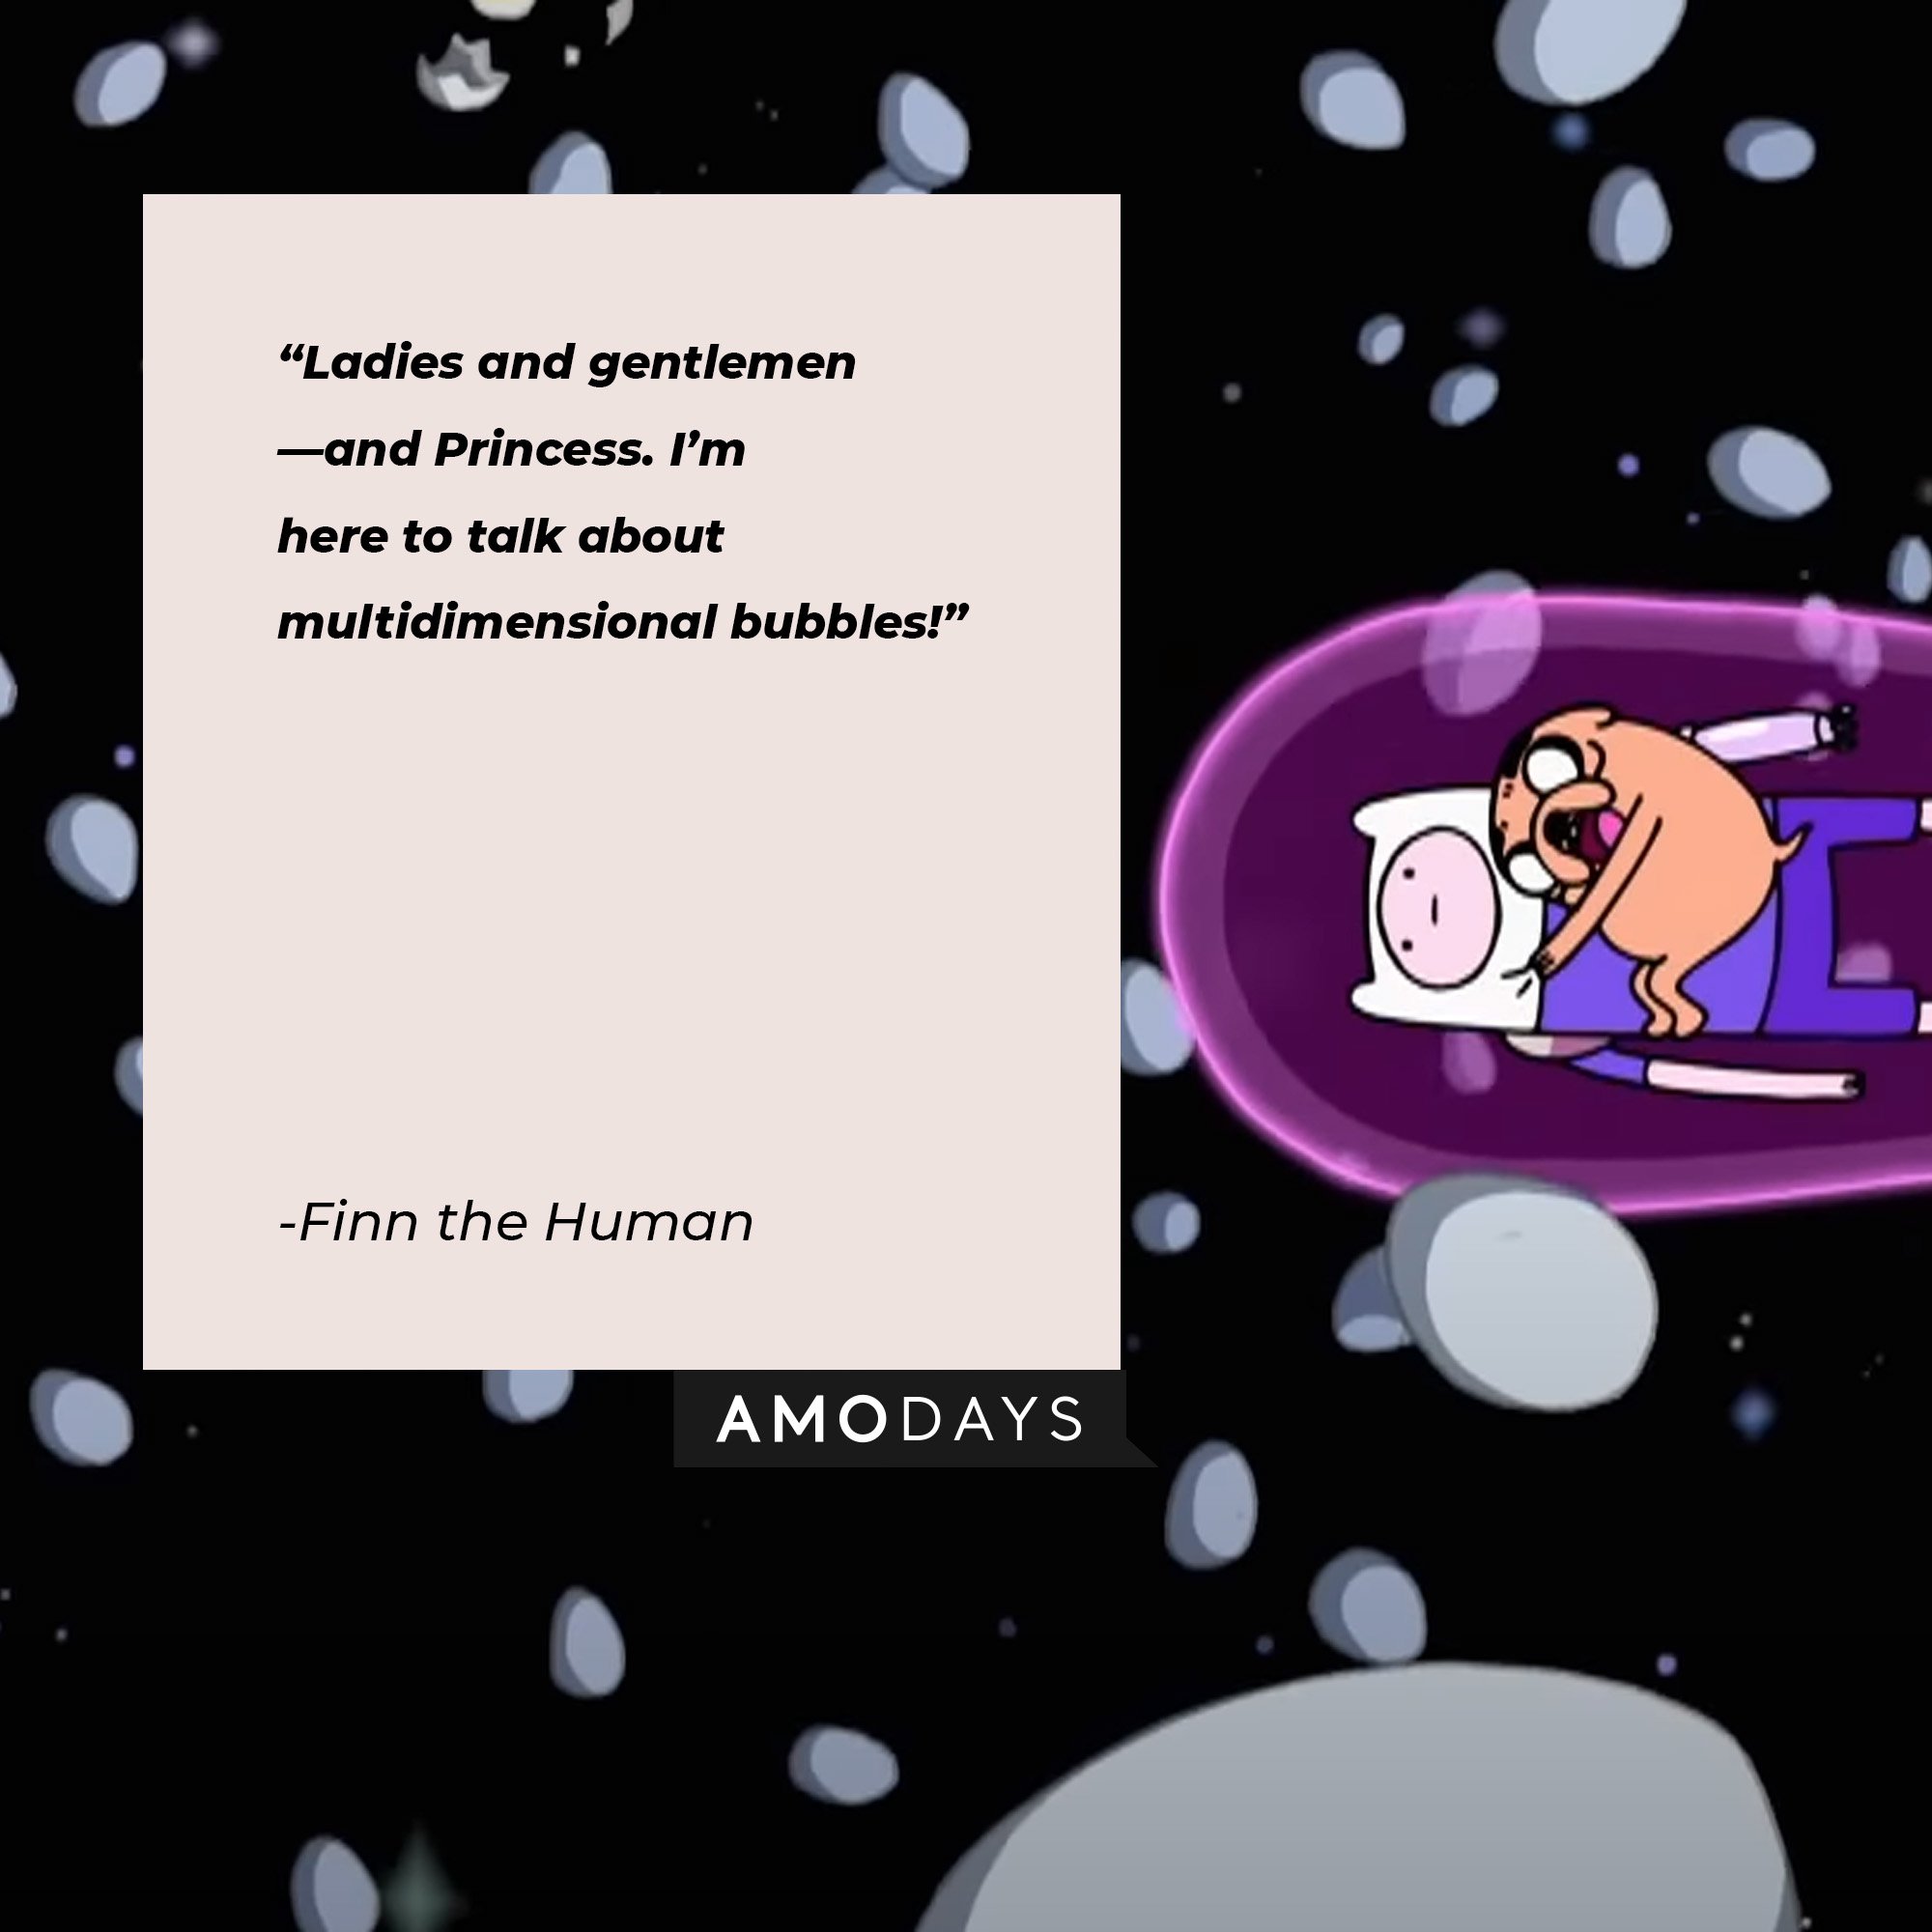  Finn the Human’s quote: “Ladies and gentlemen—and Princess. I’m here to talk about multidimensional bubbles!” | Image: AmoDays